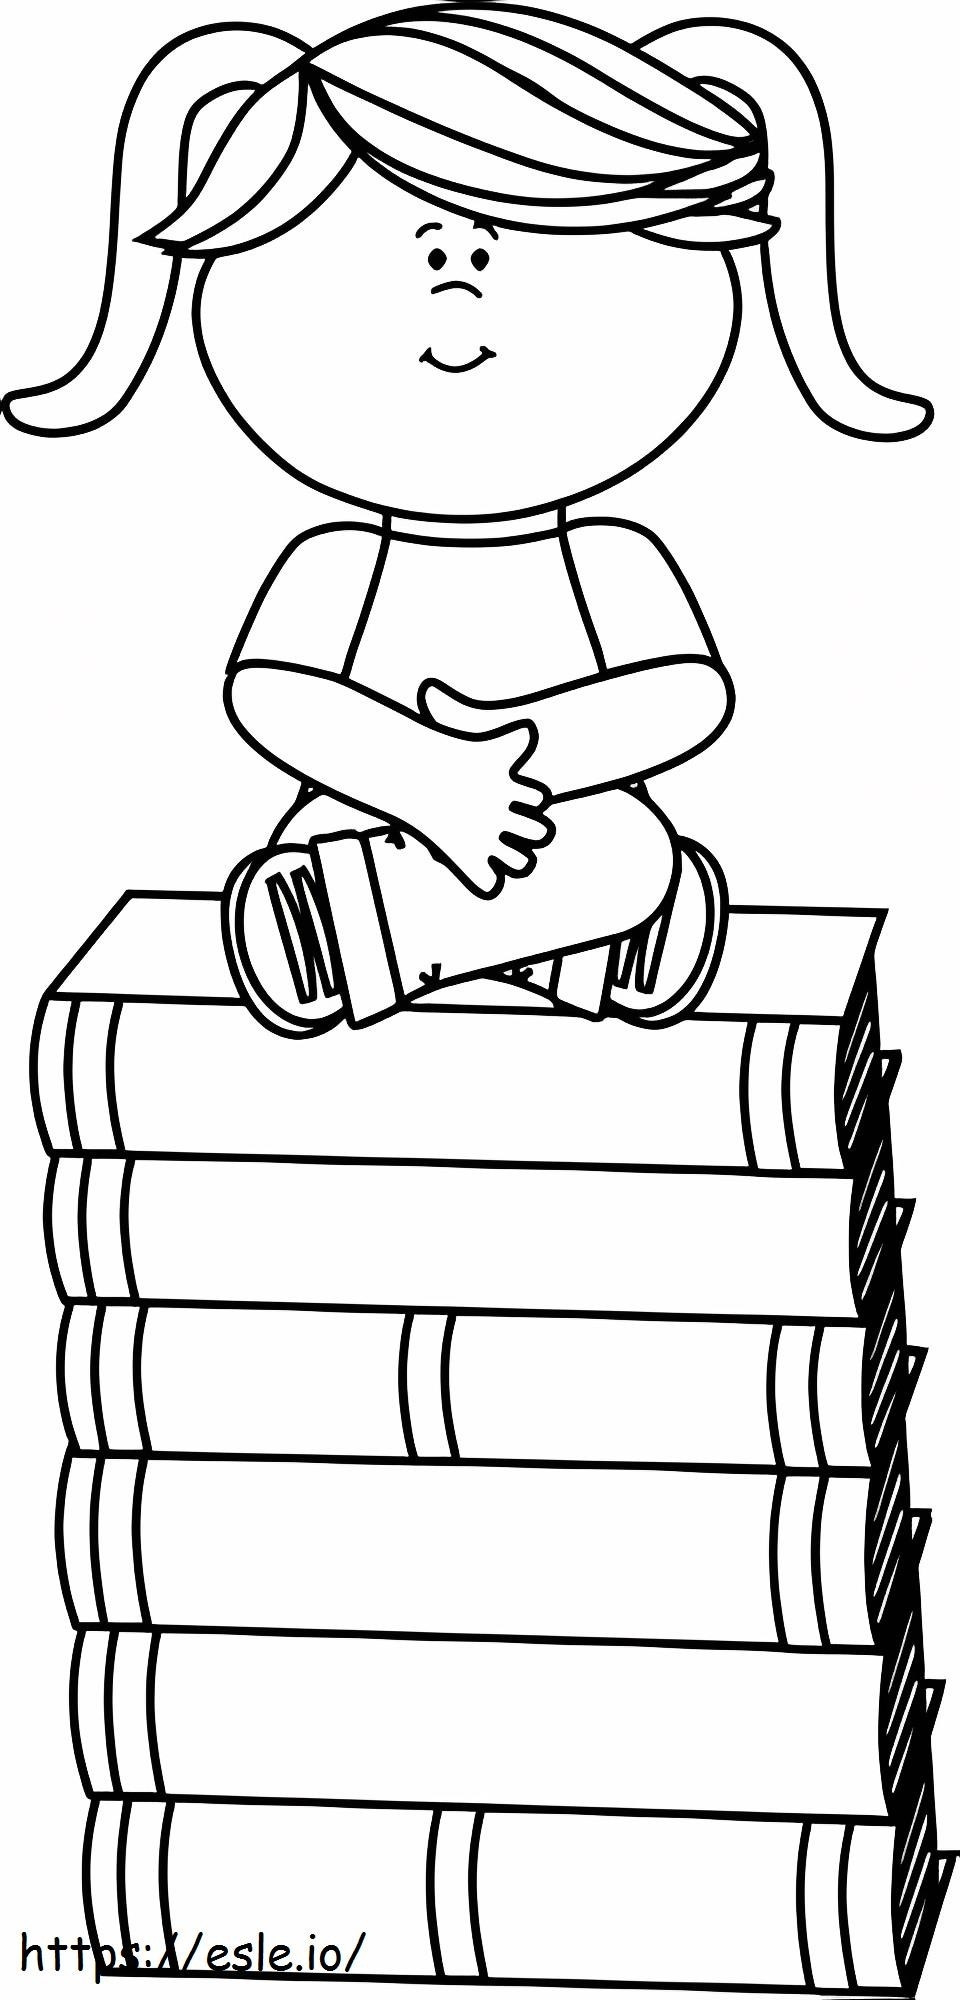 1535356863 Girl Sitting On Books A4 coloring page